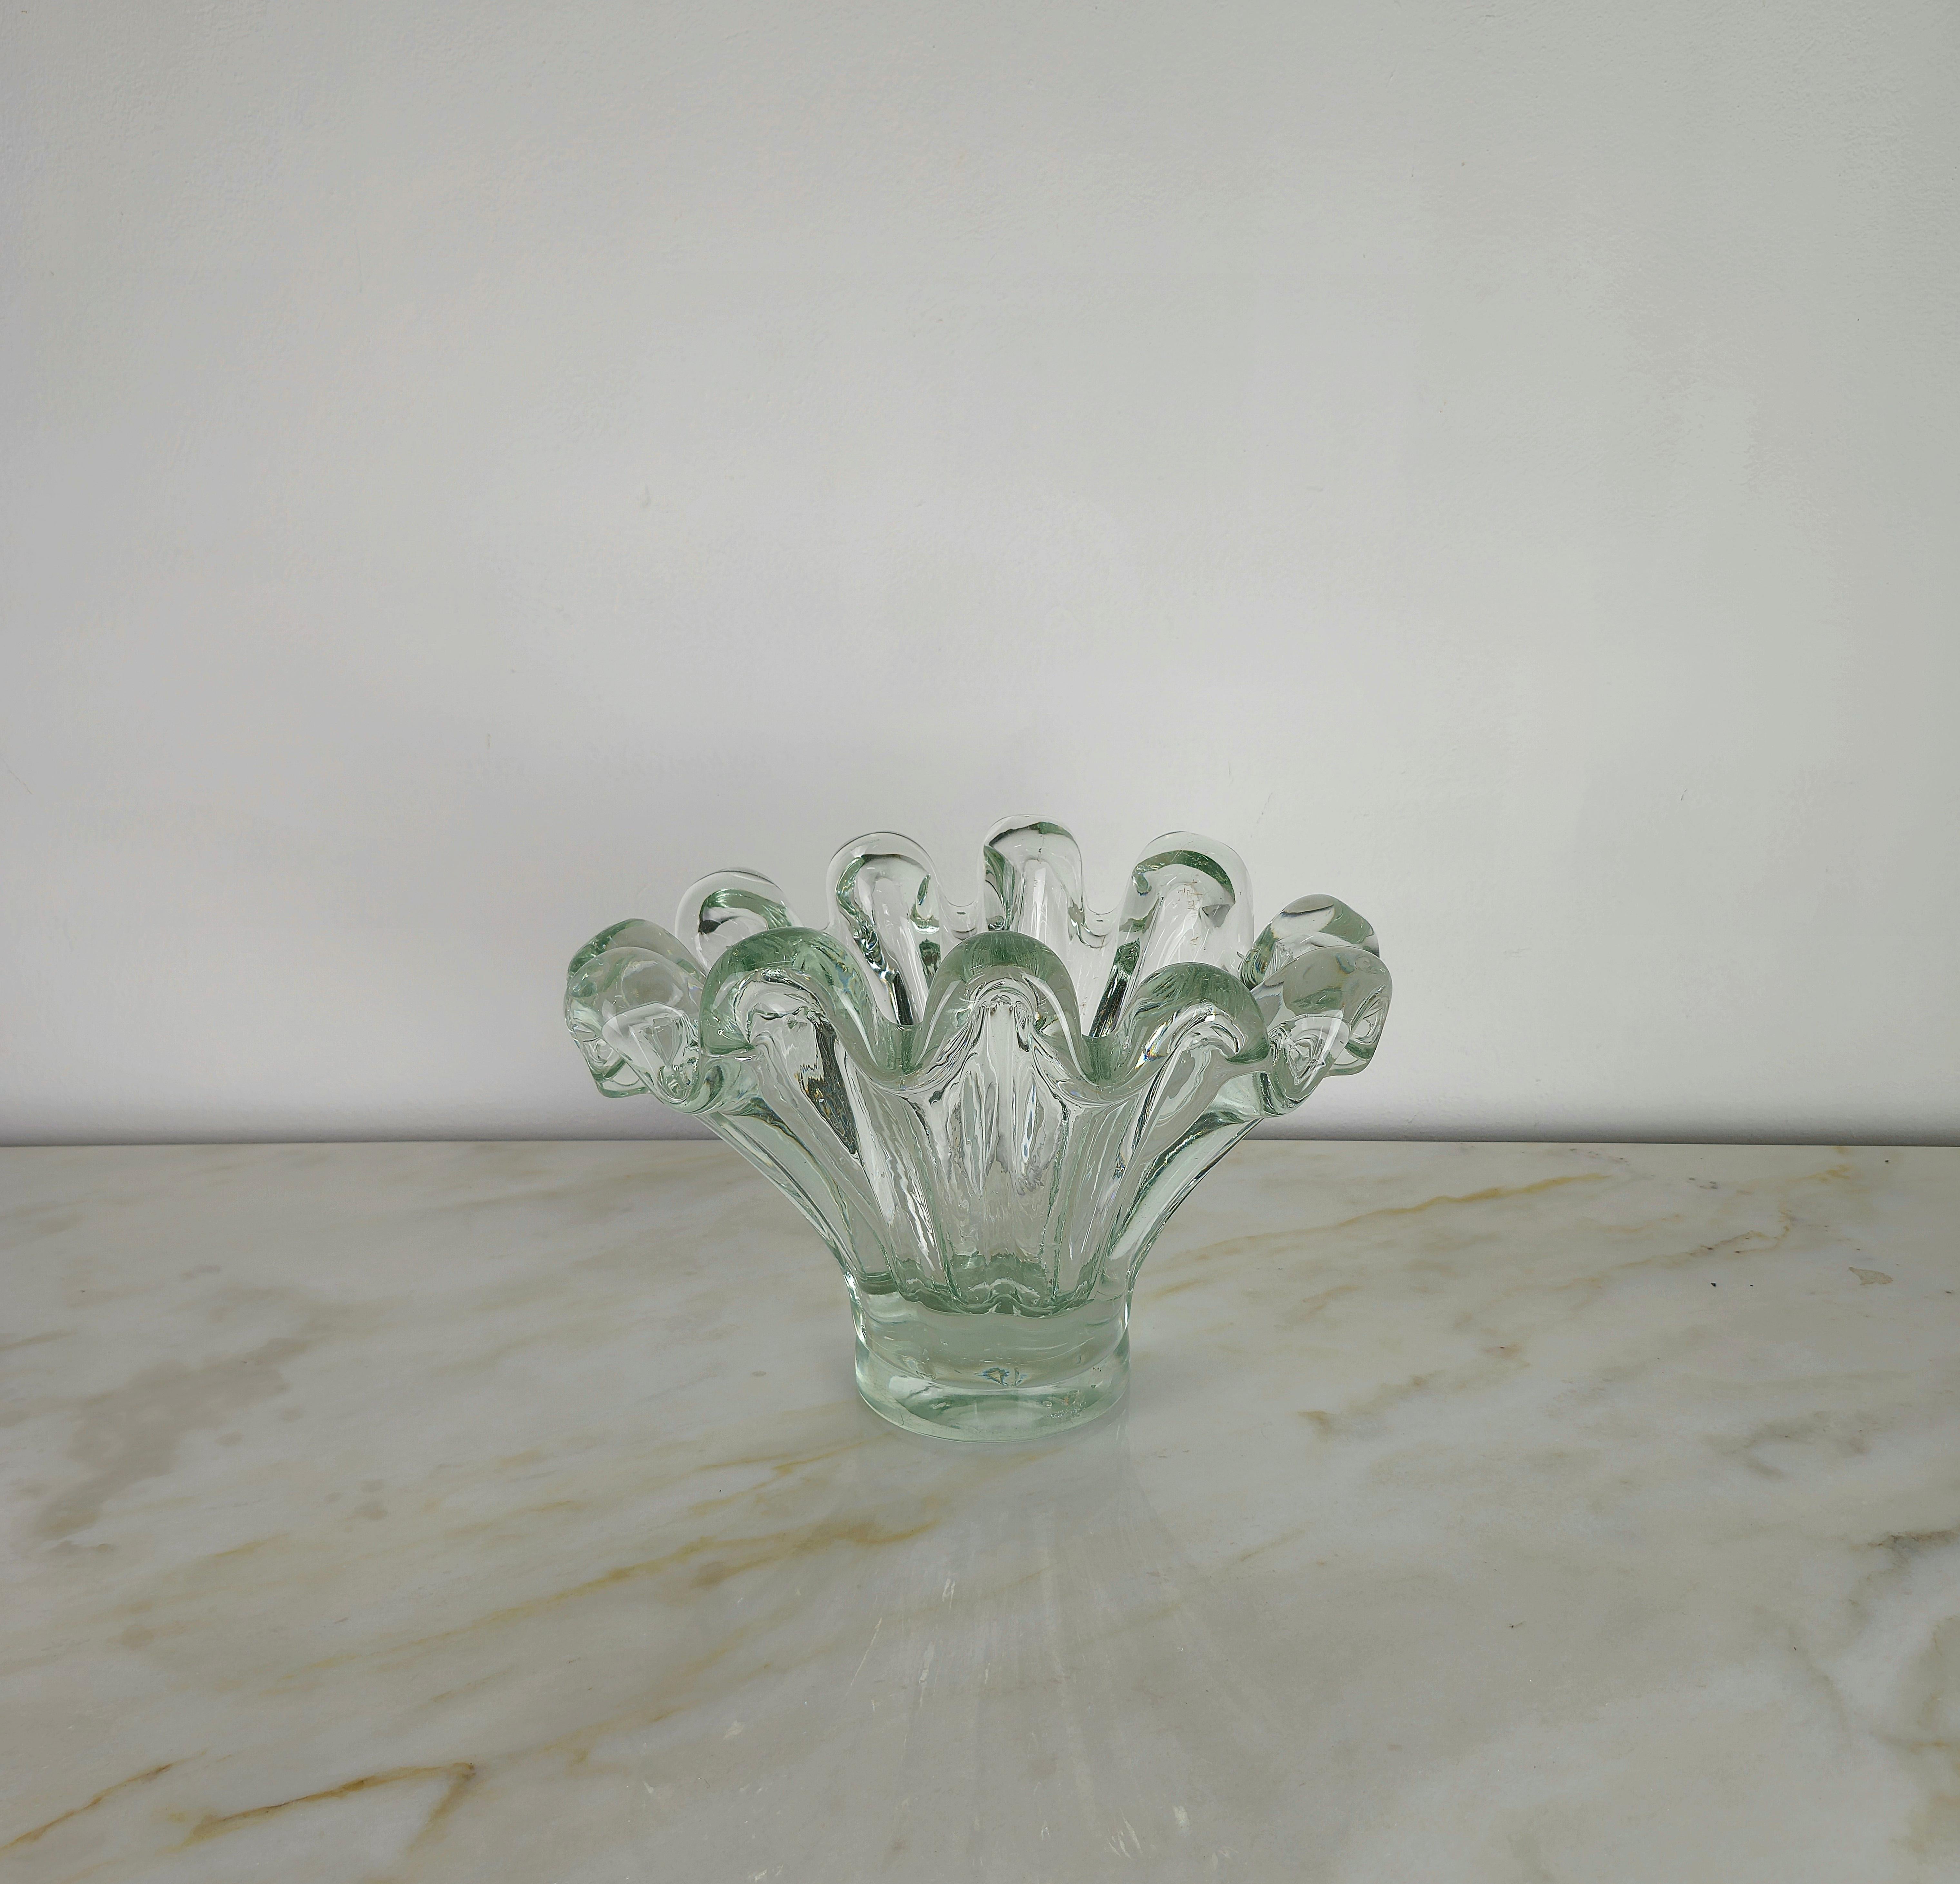 Vase Decorative Object Transparent Murano Glass Large Midcentury Italy 1960s For Sale 2